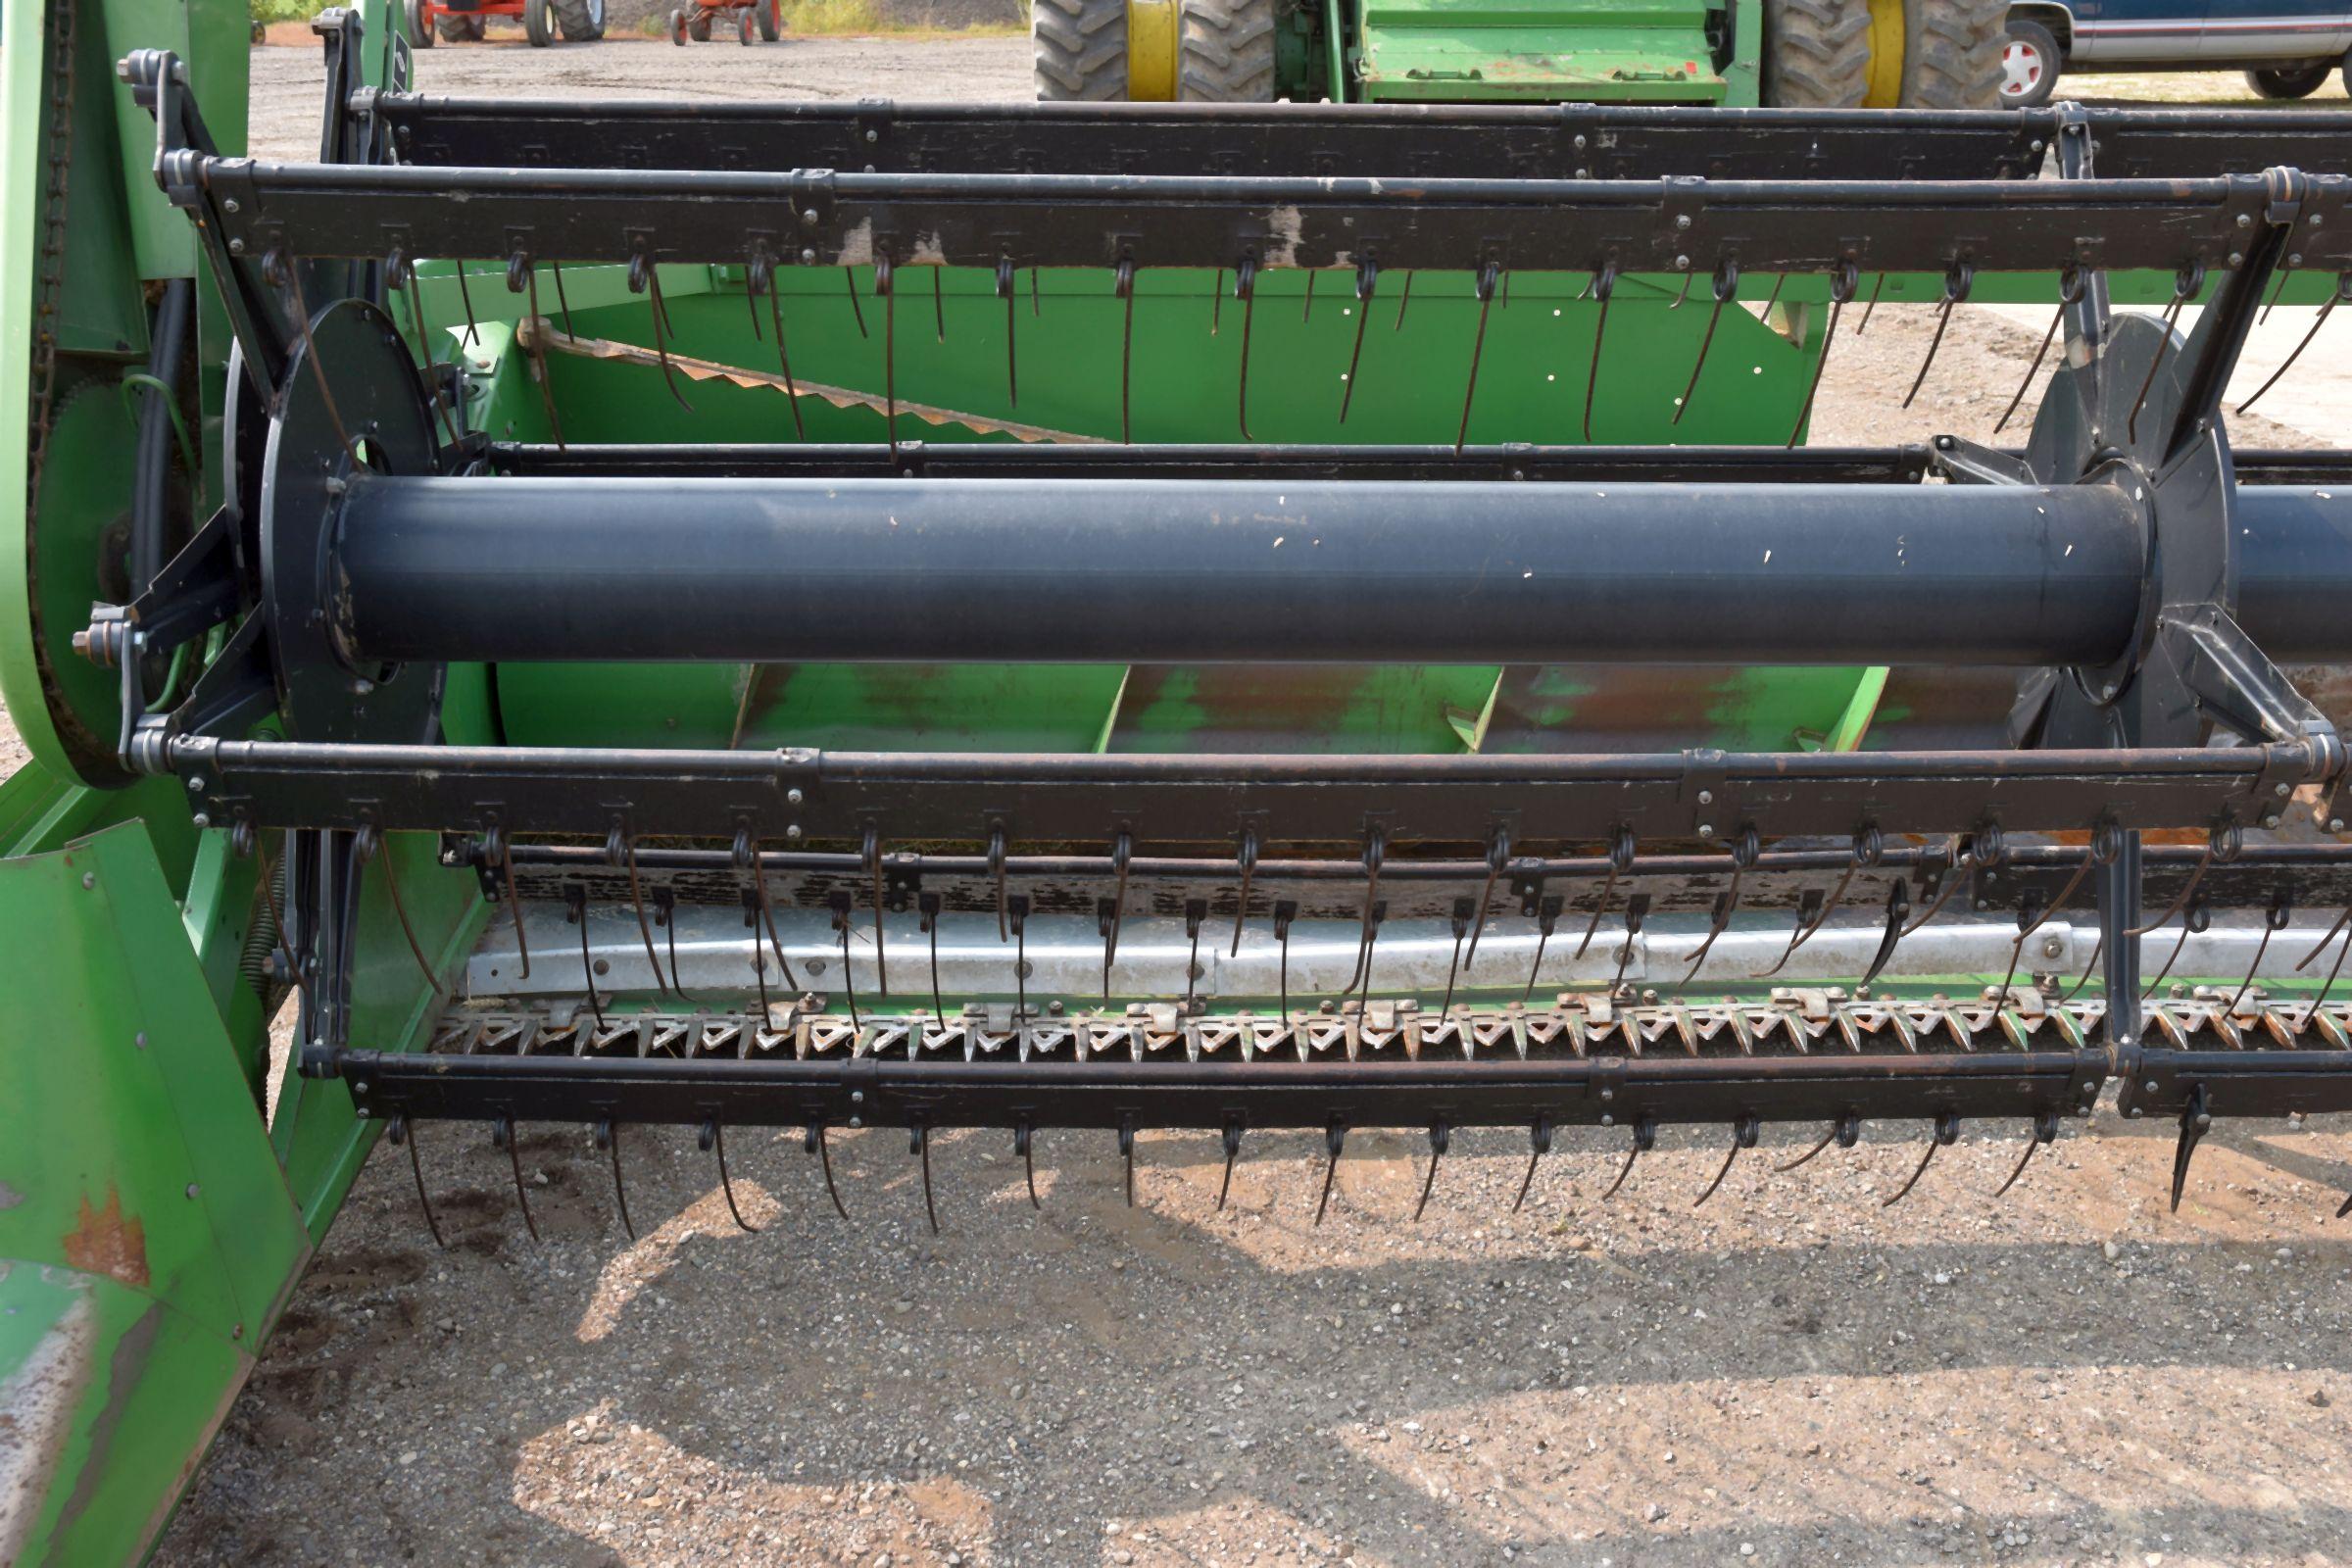 John Deere 220 Bean Head, 20’, Rock Guard, SN: F611673, New Sickle and Section In 2019